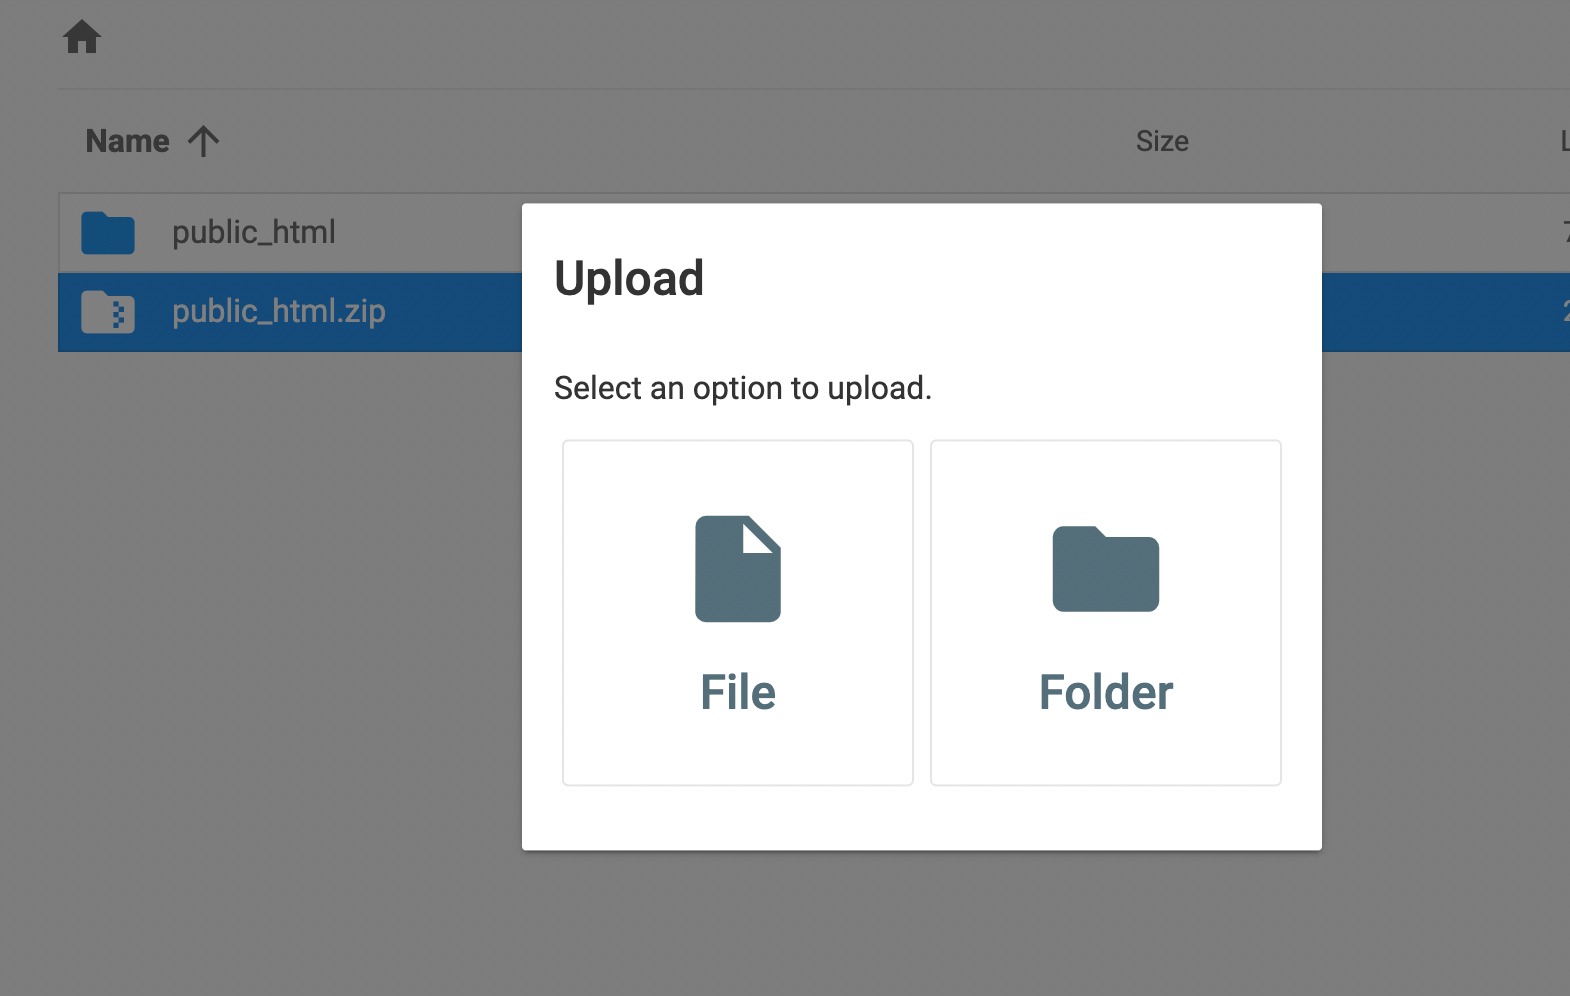 Select file to upload